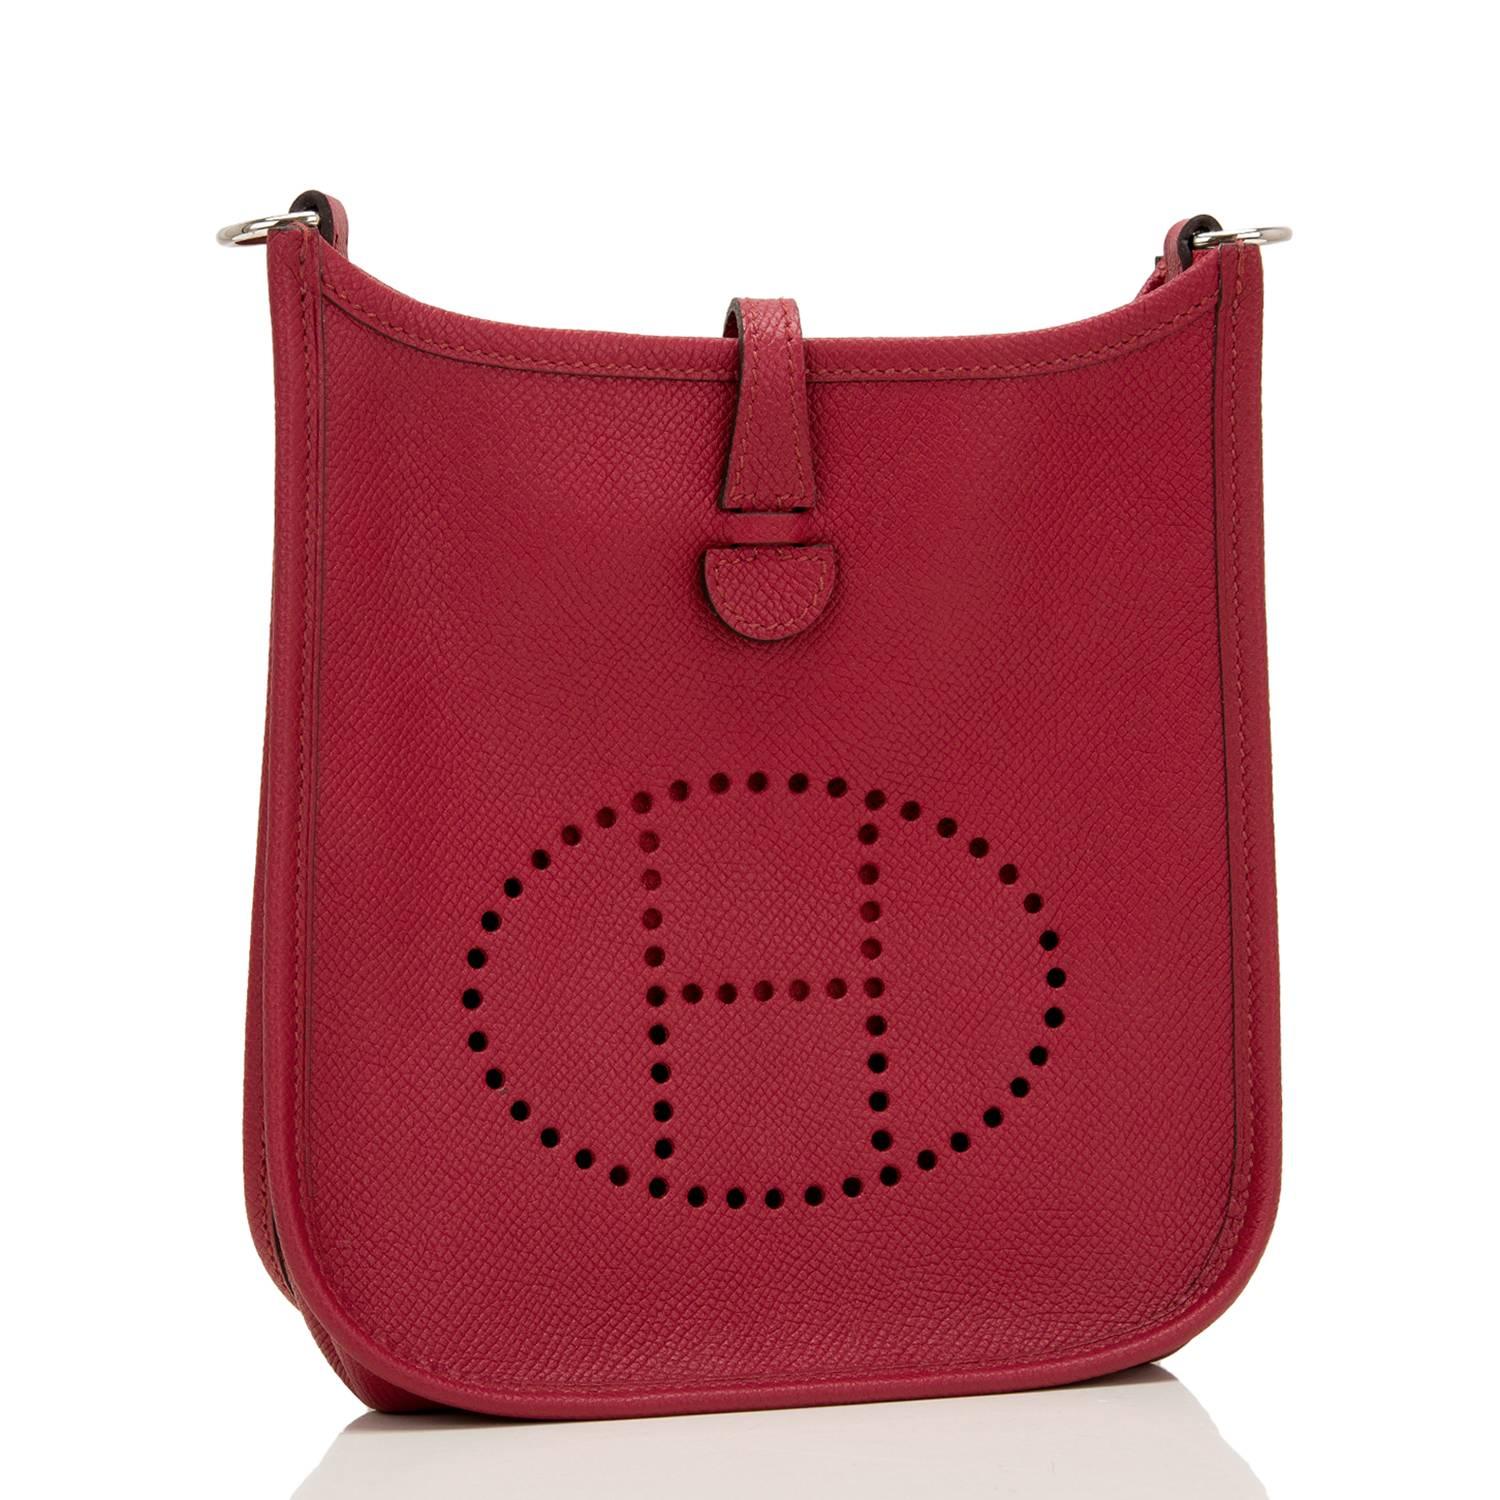 Hermes Rouge Grenat Evelyne III TPM of epsom leather with palladium hardware.

This tiny Evelyne has tonal stitching, a large perforated H icon in circle at front, a rear pocket, a pull tab top closure that has a snap closure at the rear, and a